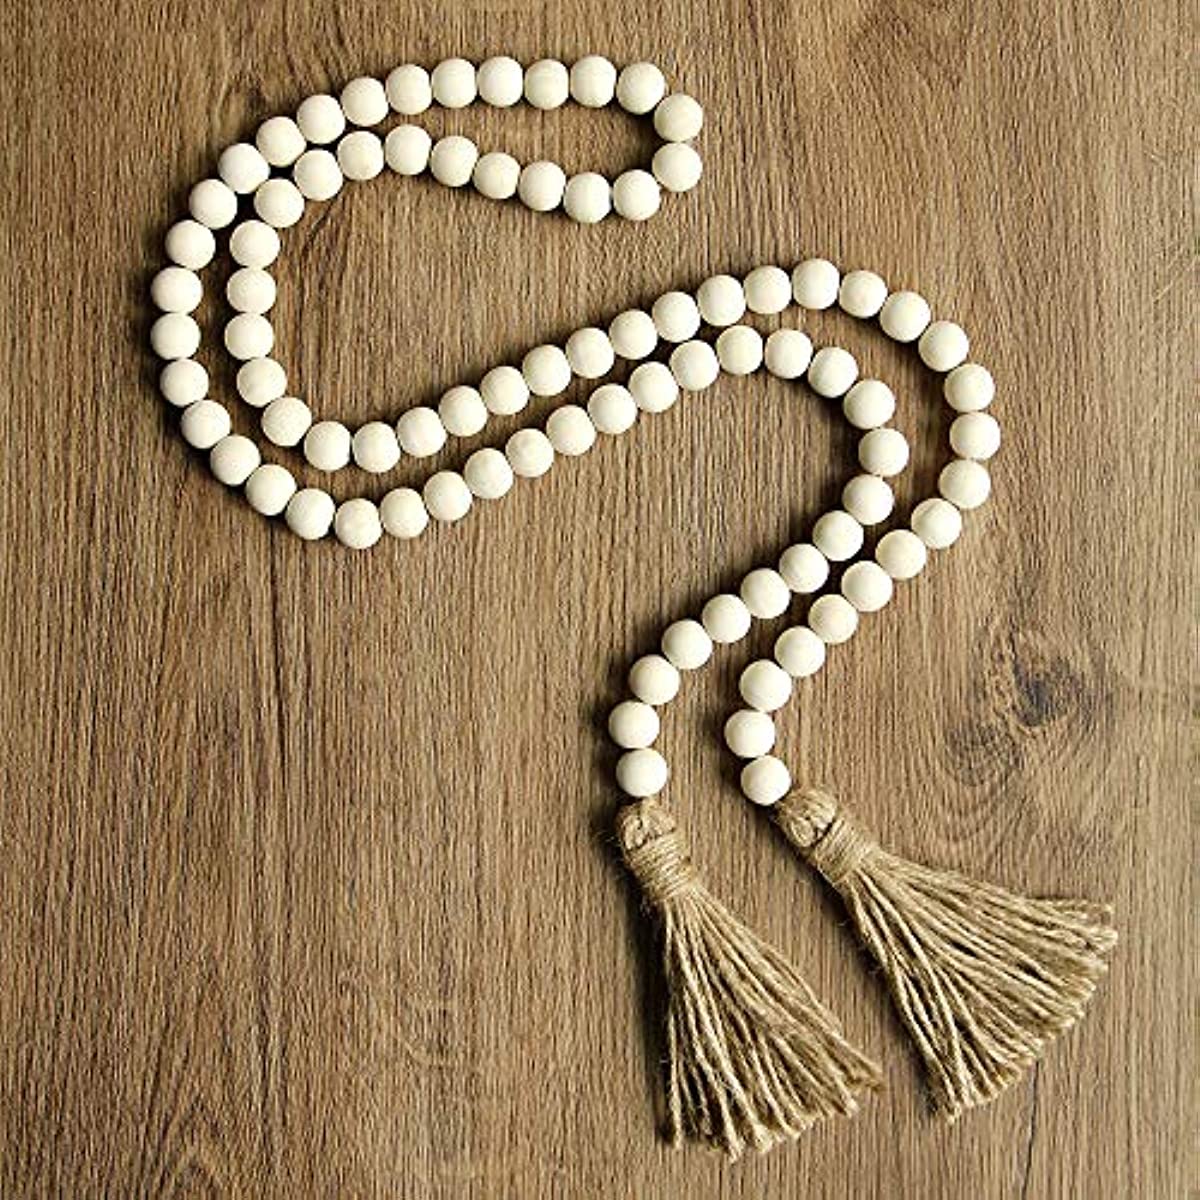 Ornativity Farmhouse Beads Wooden Garland- Wood Prayer Bead Garland with  Tassels Boho Rustic Accented Home décor Country style hanging beads 60  inches (Natural Wood)